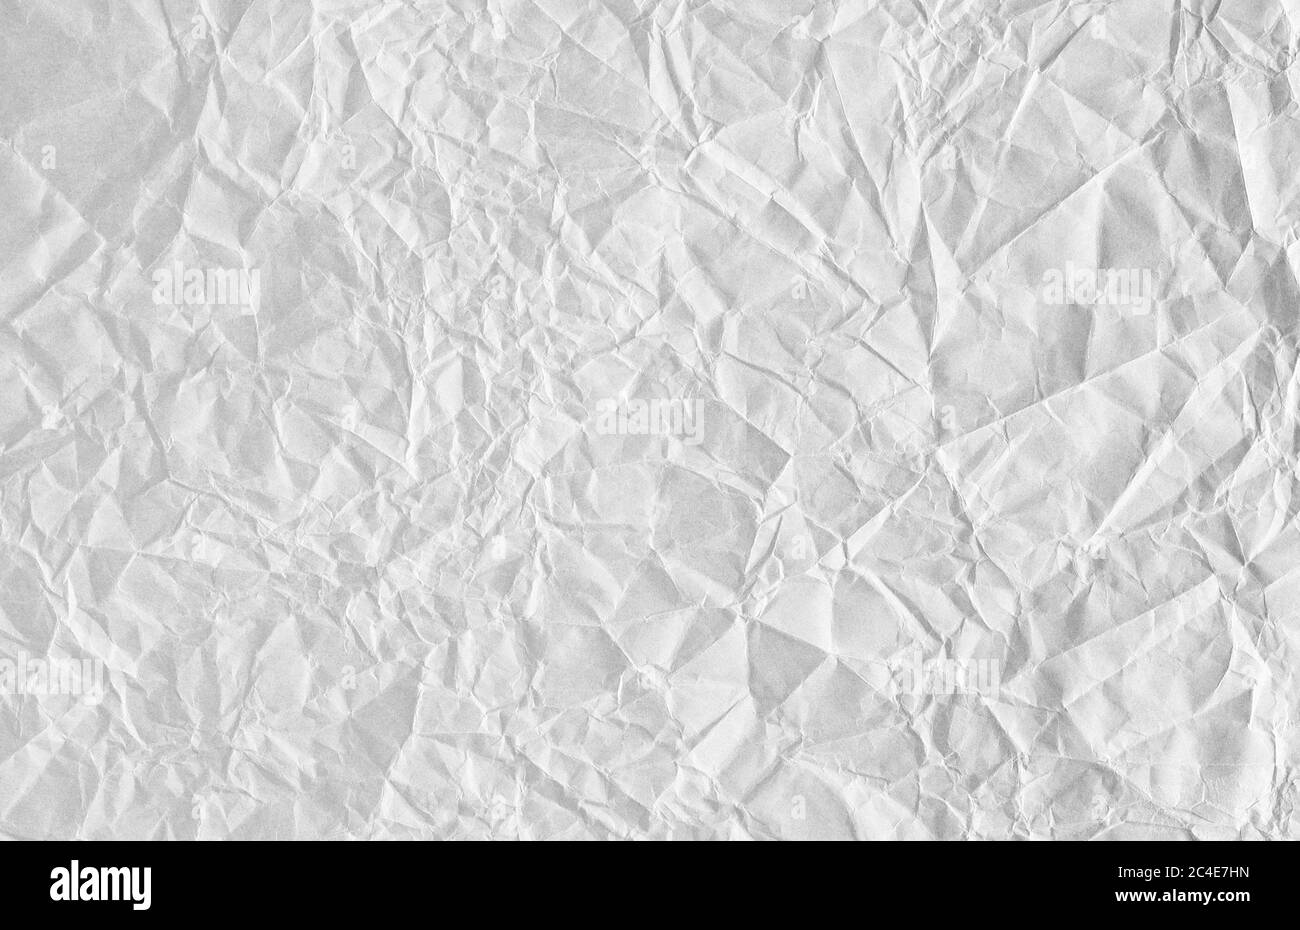 The Background Is White Texture Of Paper With Kinks And Dents Old And Dilapidated Stock Photo Alamy